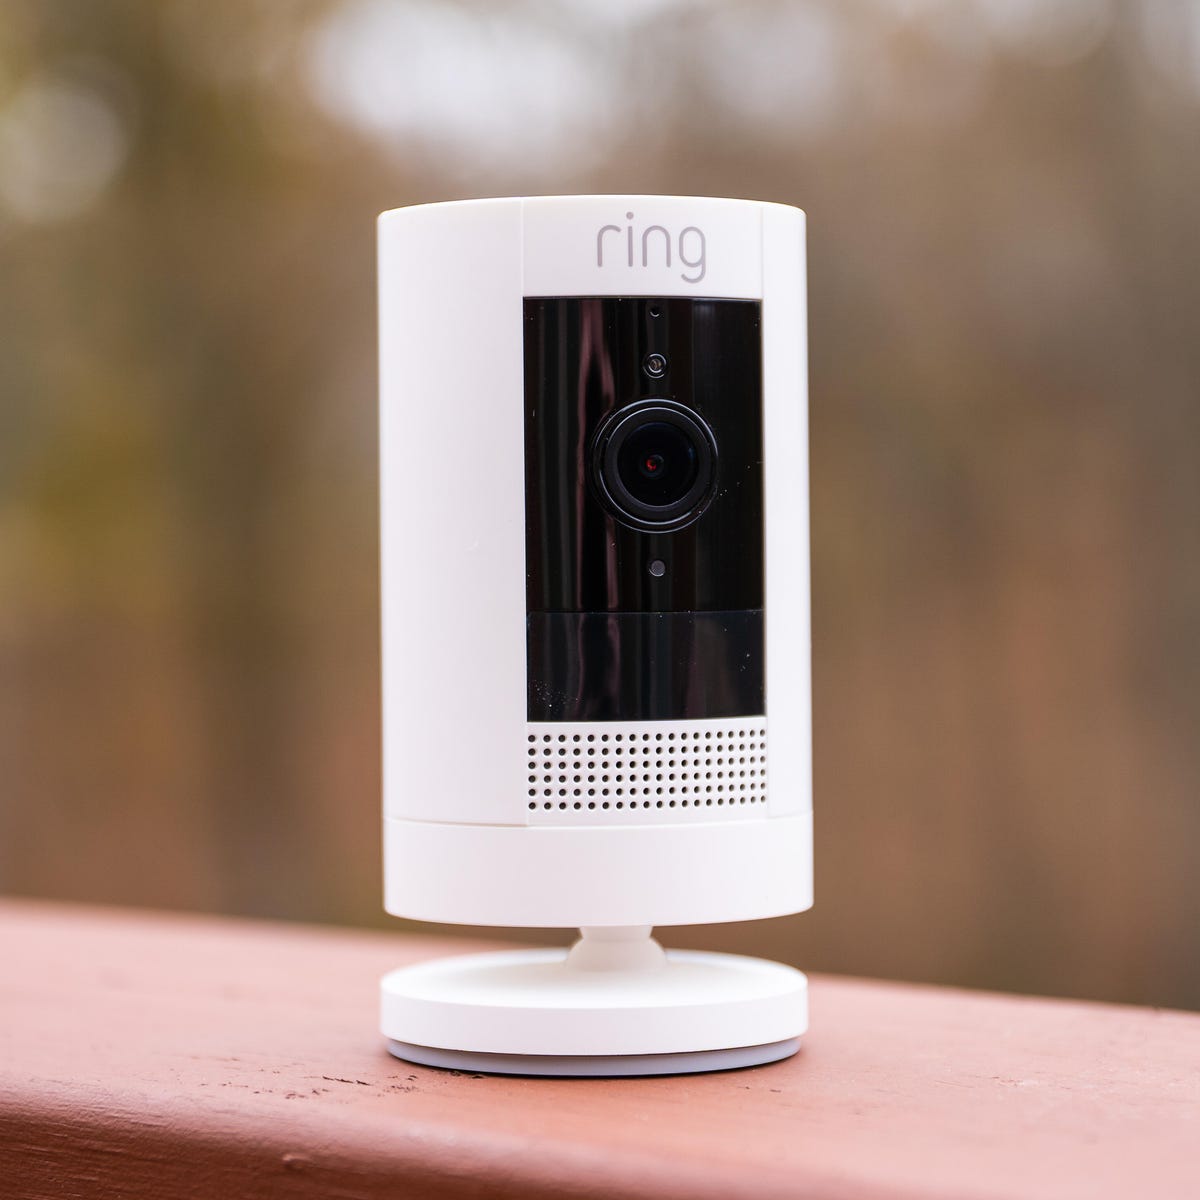 Ring Stick Up Cam Battery review: this versatile security camera doesn't  cost too much - CNET